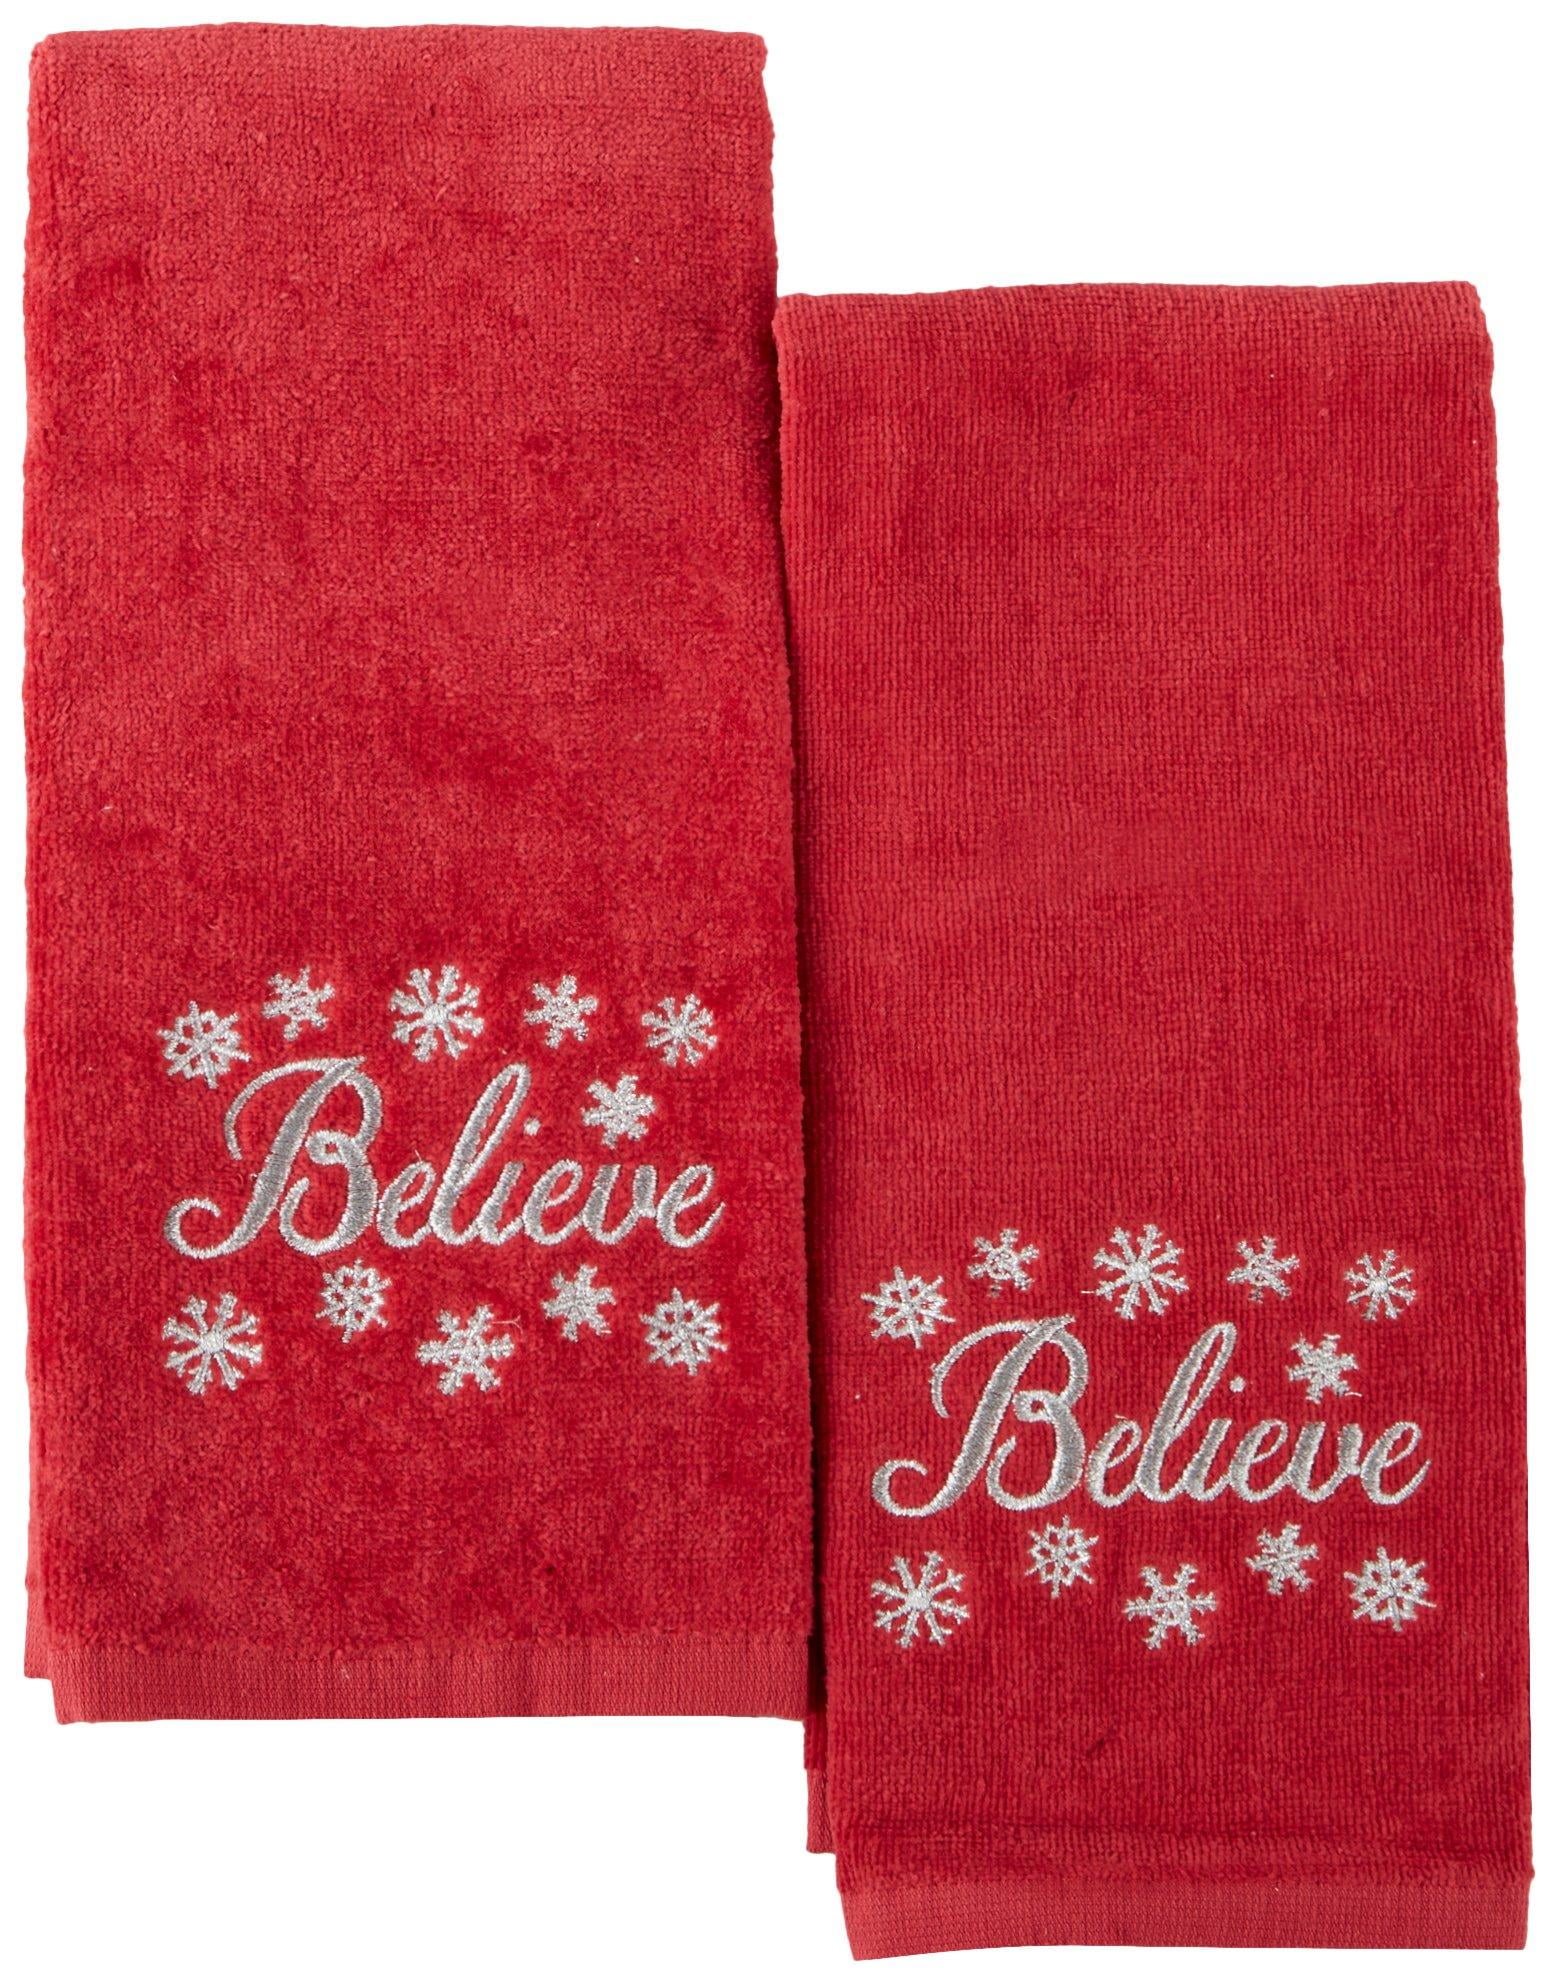 Follow The Stars To The Beach Fingertip Towel Set 2 Pc Set Details about   ATI 2-pc 